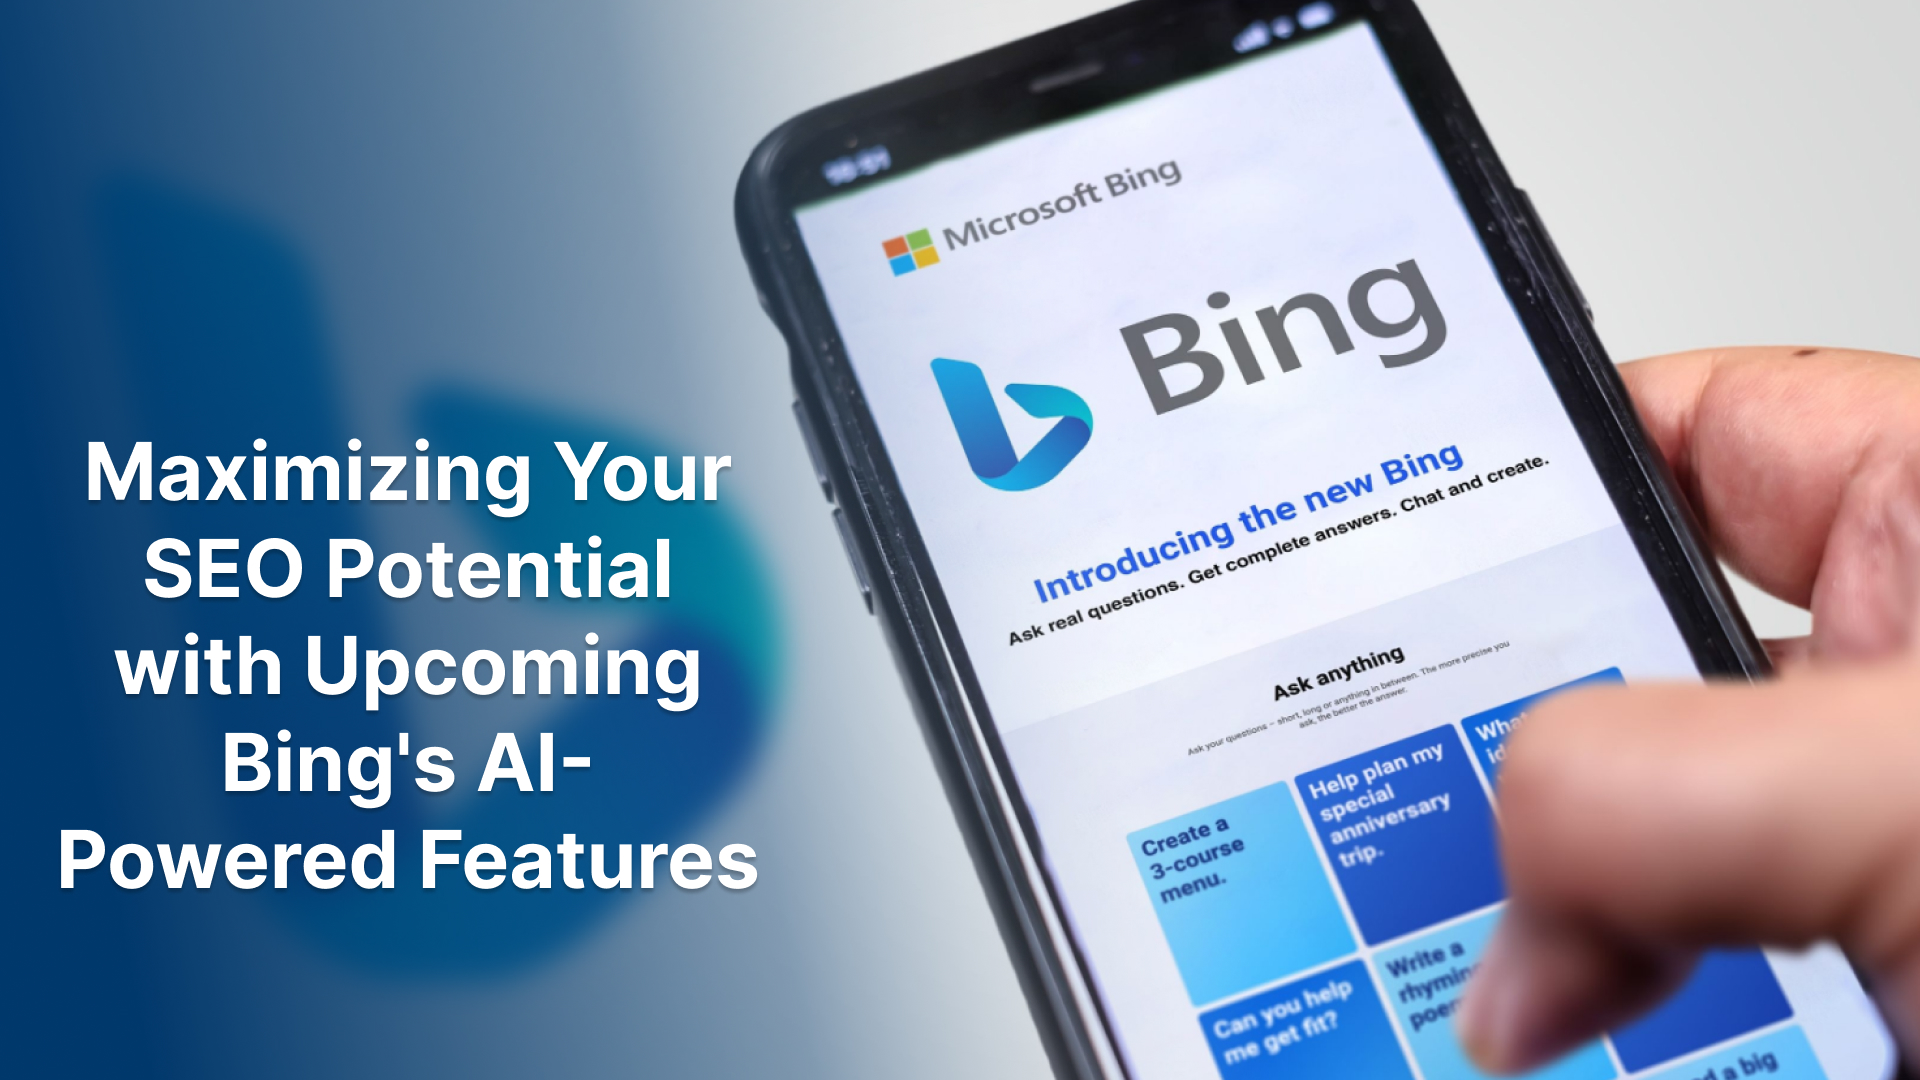 Maximizing Your SEO Potential with Upcoming Bing’s AI-Powered Features